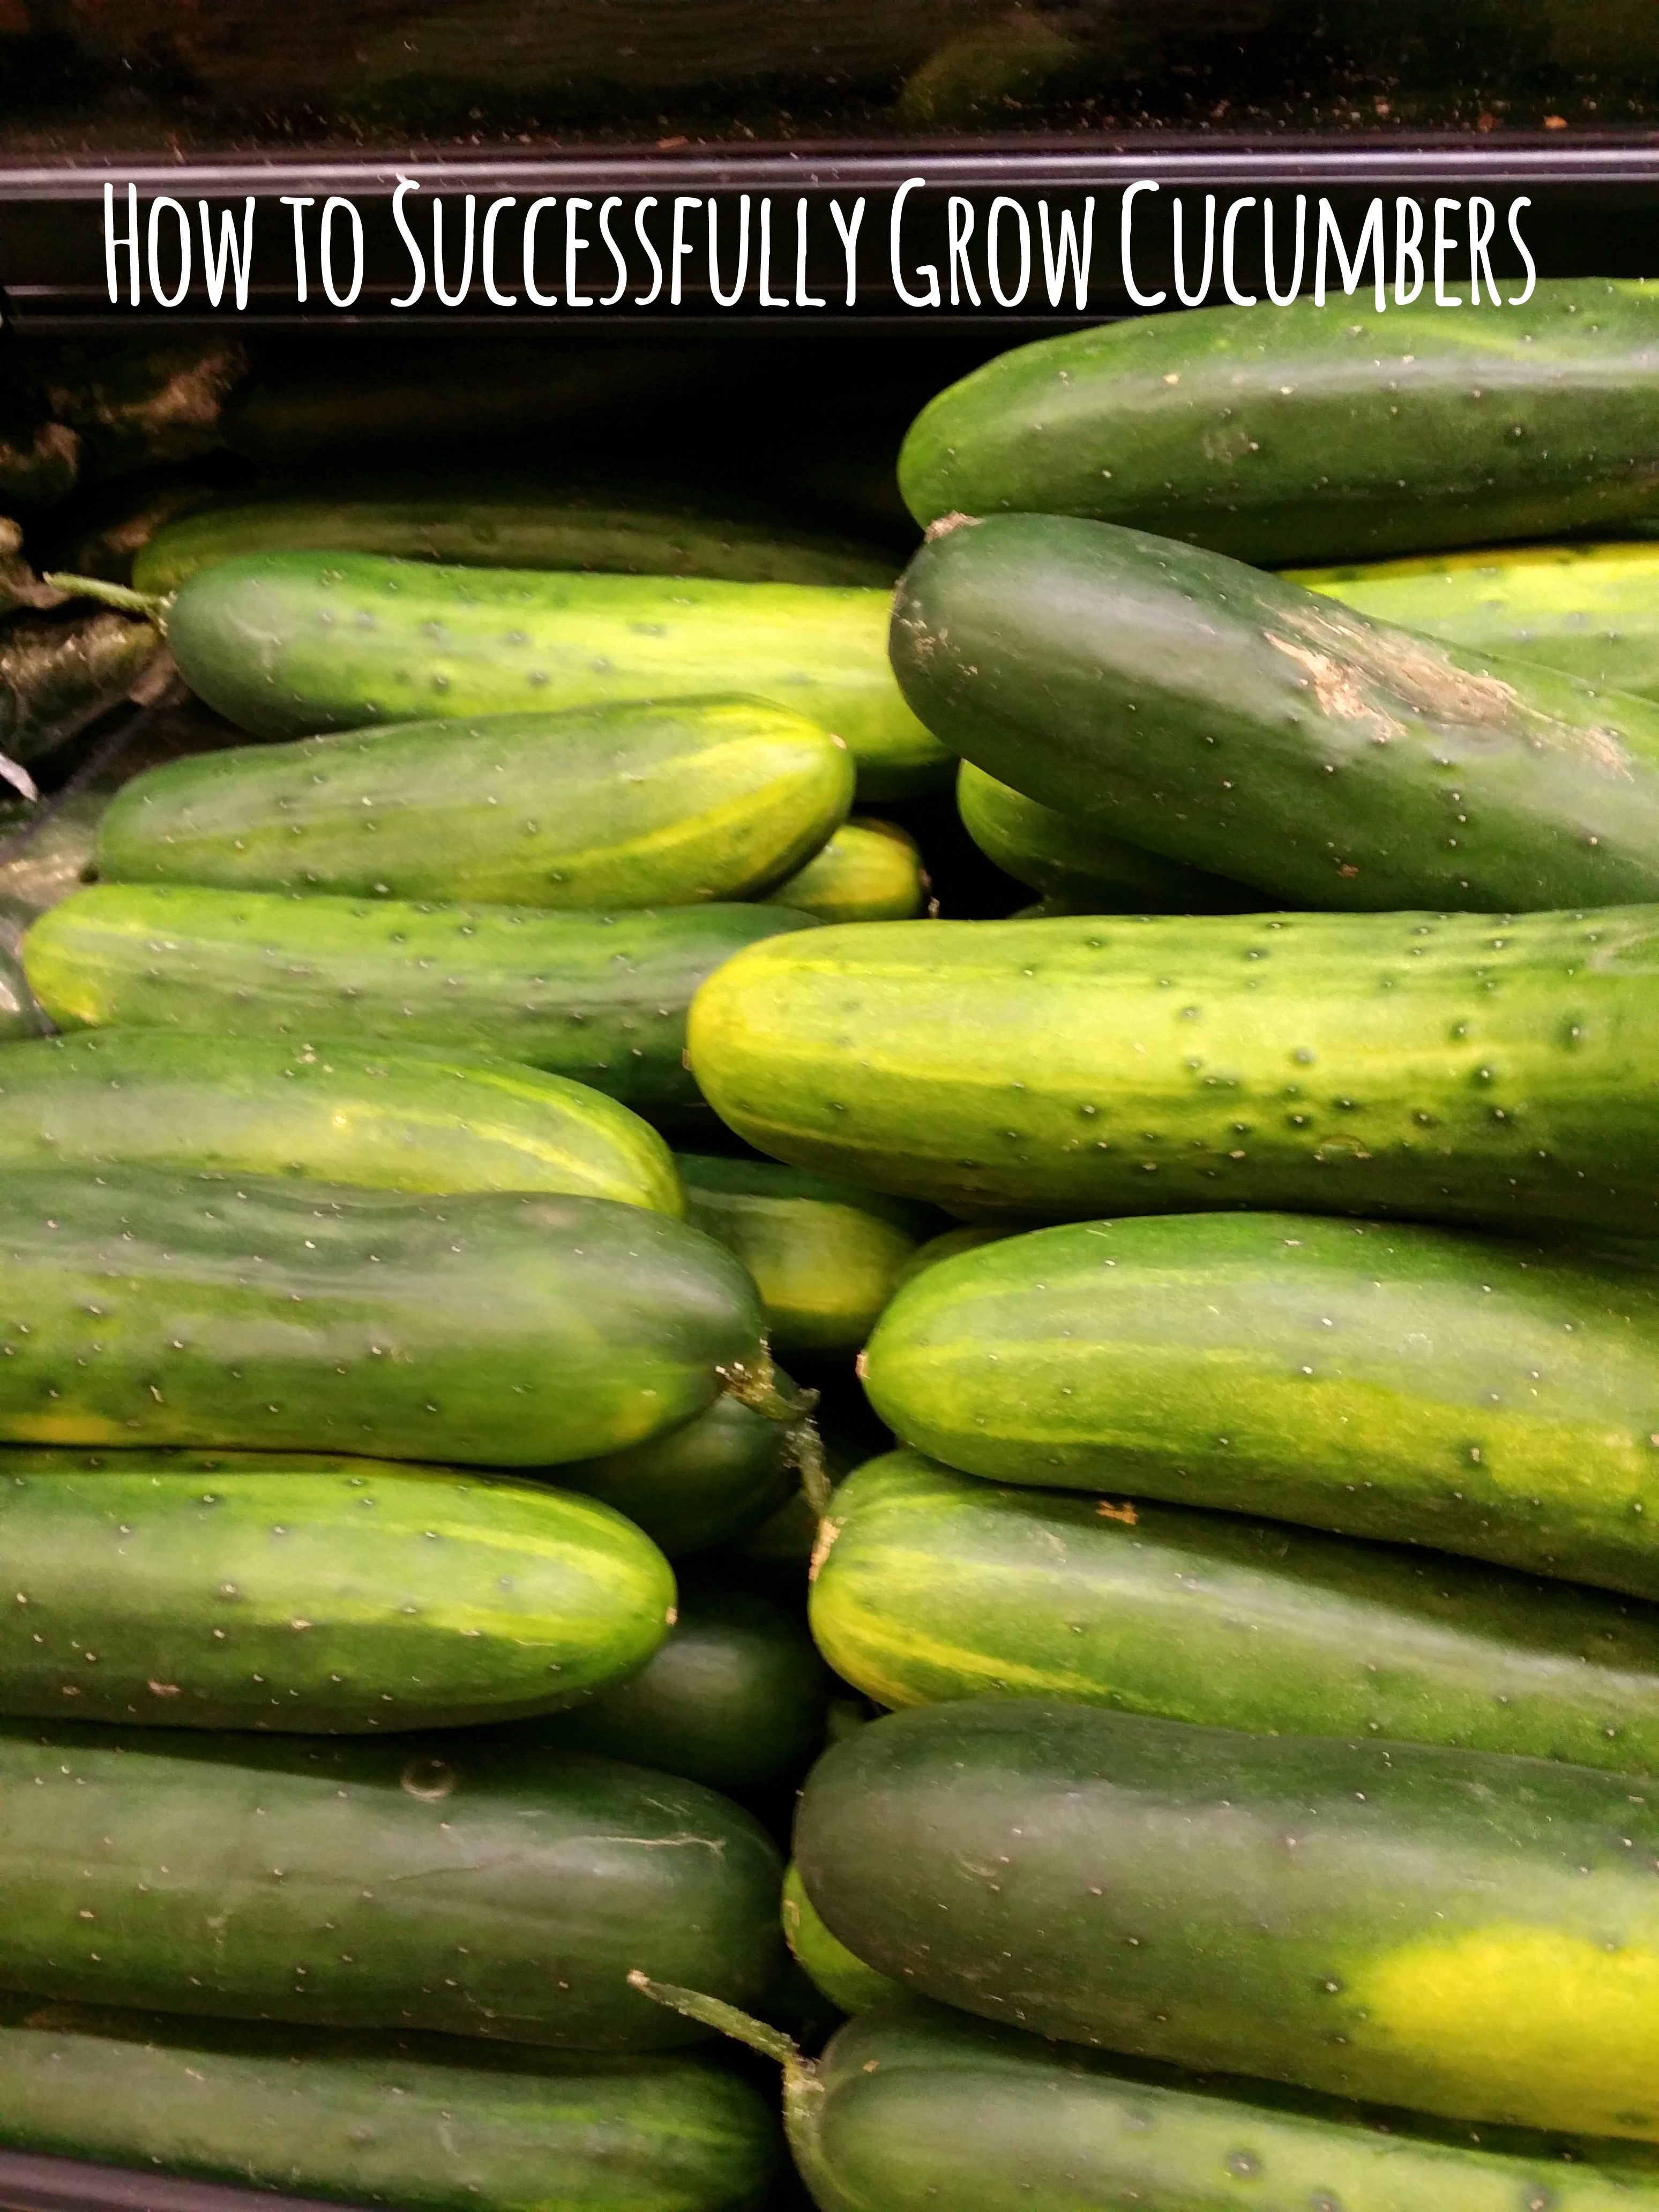 How to Successfully Grow Cucumbers